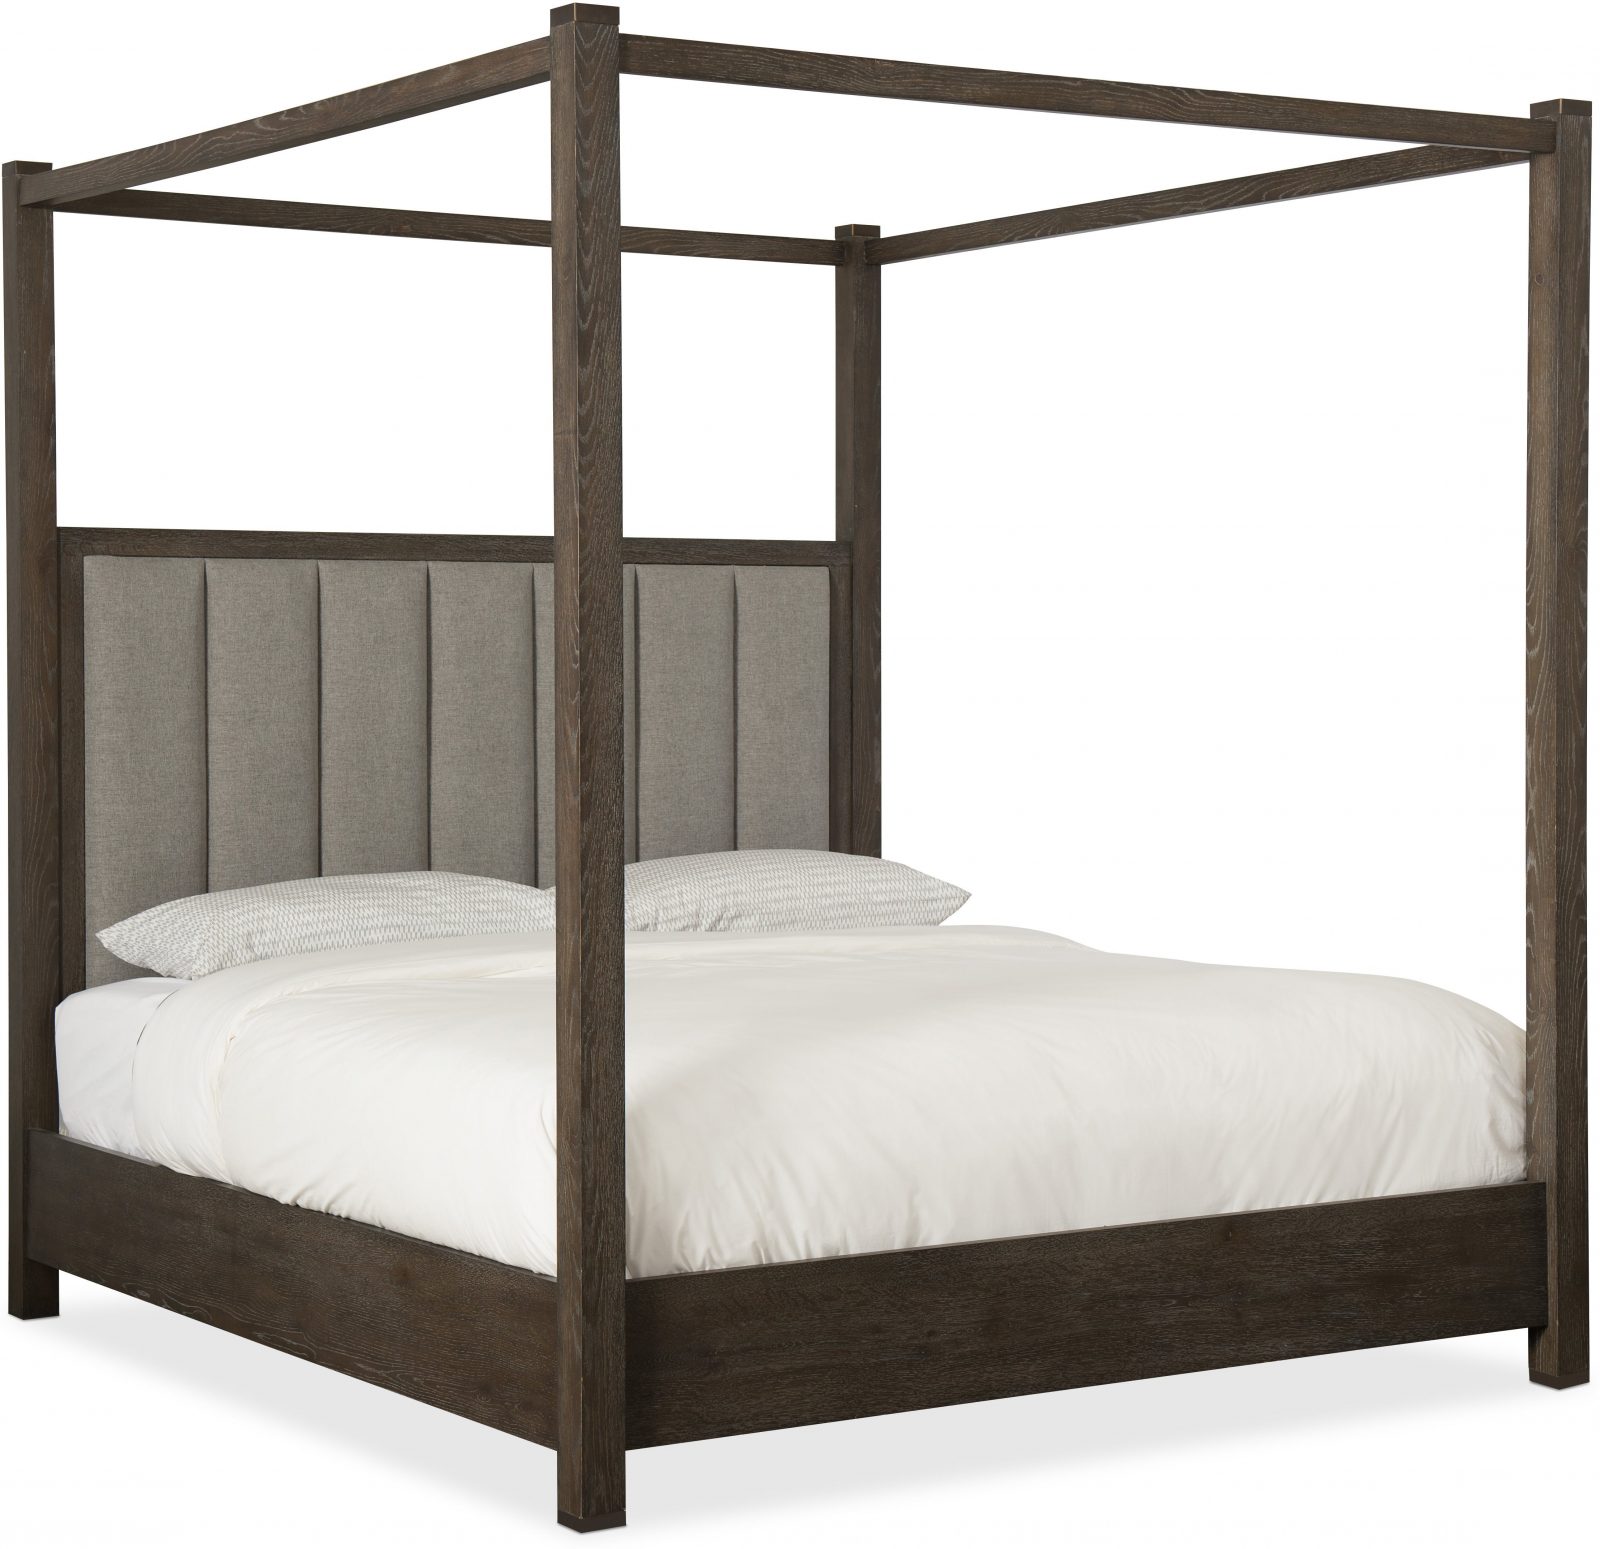 Miramar Aventura Jackson King Poster Bed w-Tall Posts and Canopy